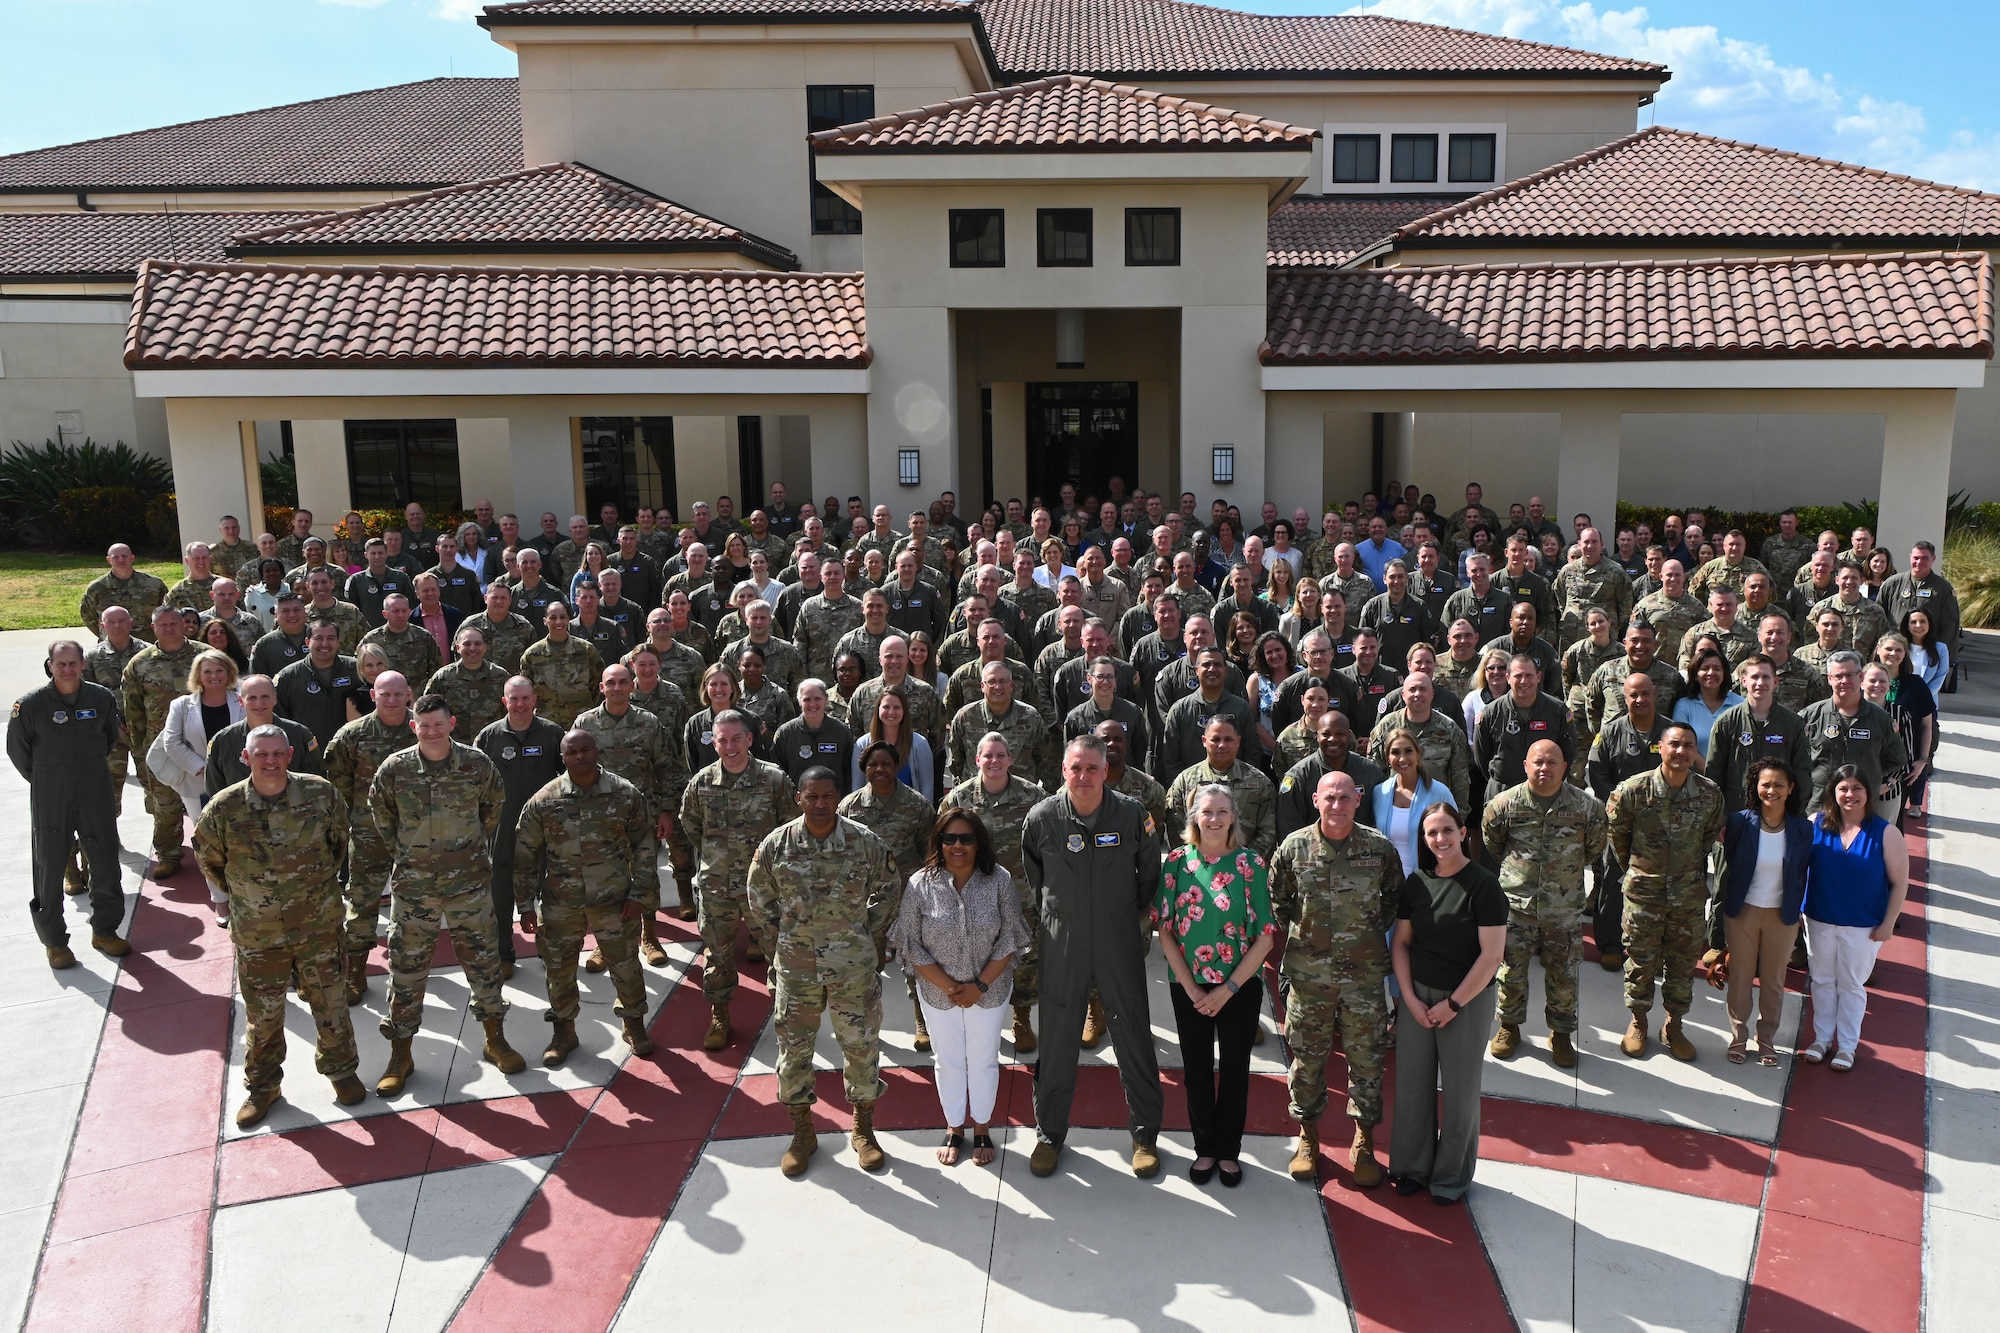 Total Force Mobility Air Force leaders pose for a group photo during Phoenix Rally at MacDill Air Force Base, Florida, April 29, 2024. Spring Phoenix Rally brought together more than 250 Total Force Mobility Air Force leaders and spouses to discuss Warrior Heart, Air Mobility Command's strategy and priorities, and how to work together to ensure the Mobility Air Force is ready to deliver Rapid Global Mobility across the Joint Force. (U.S. Air Force photo by Senior Airman Jessica Do)